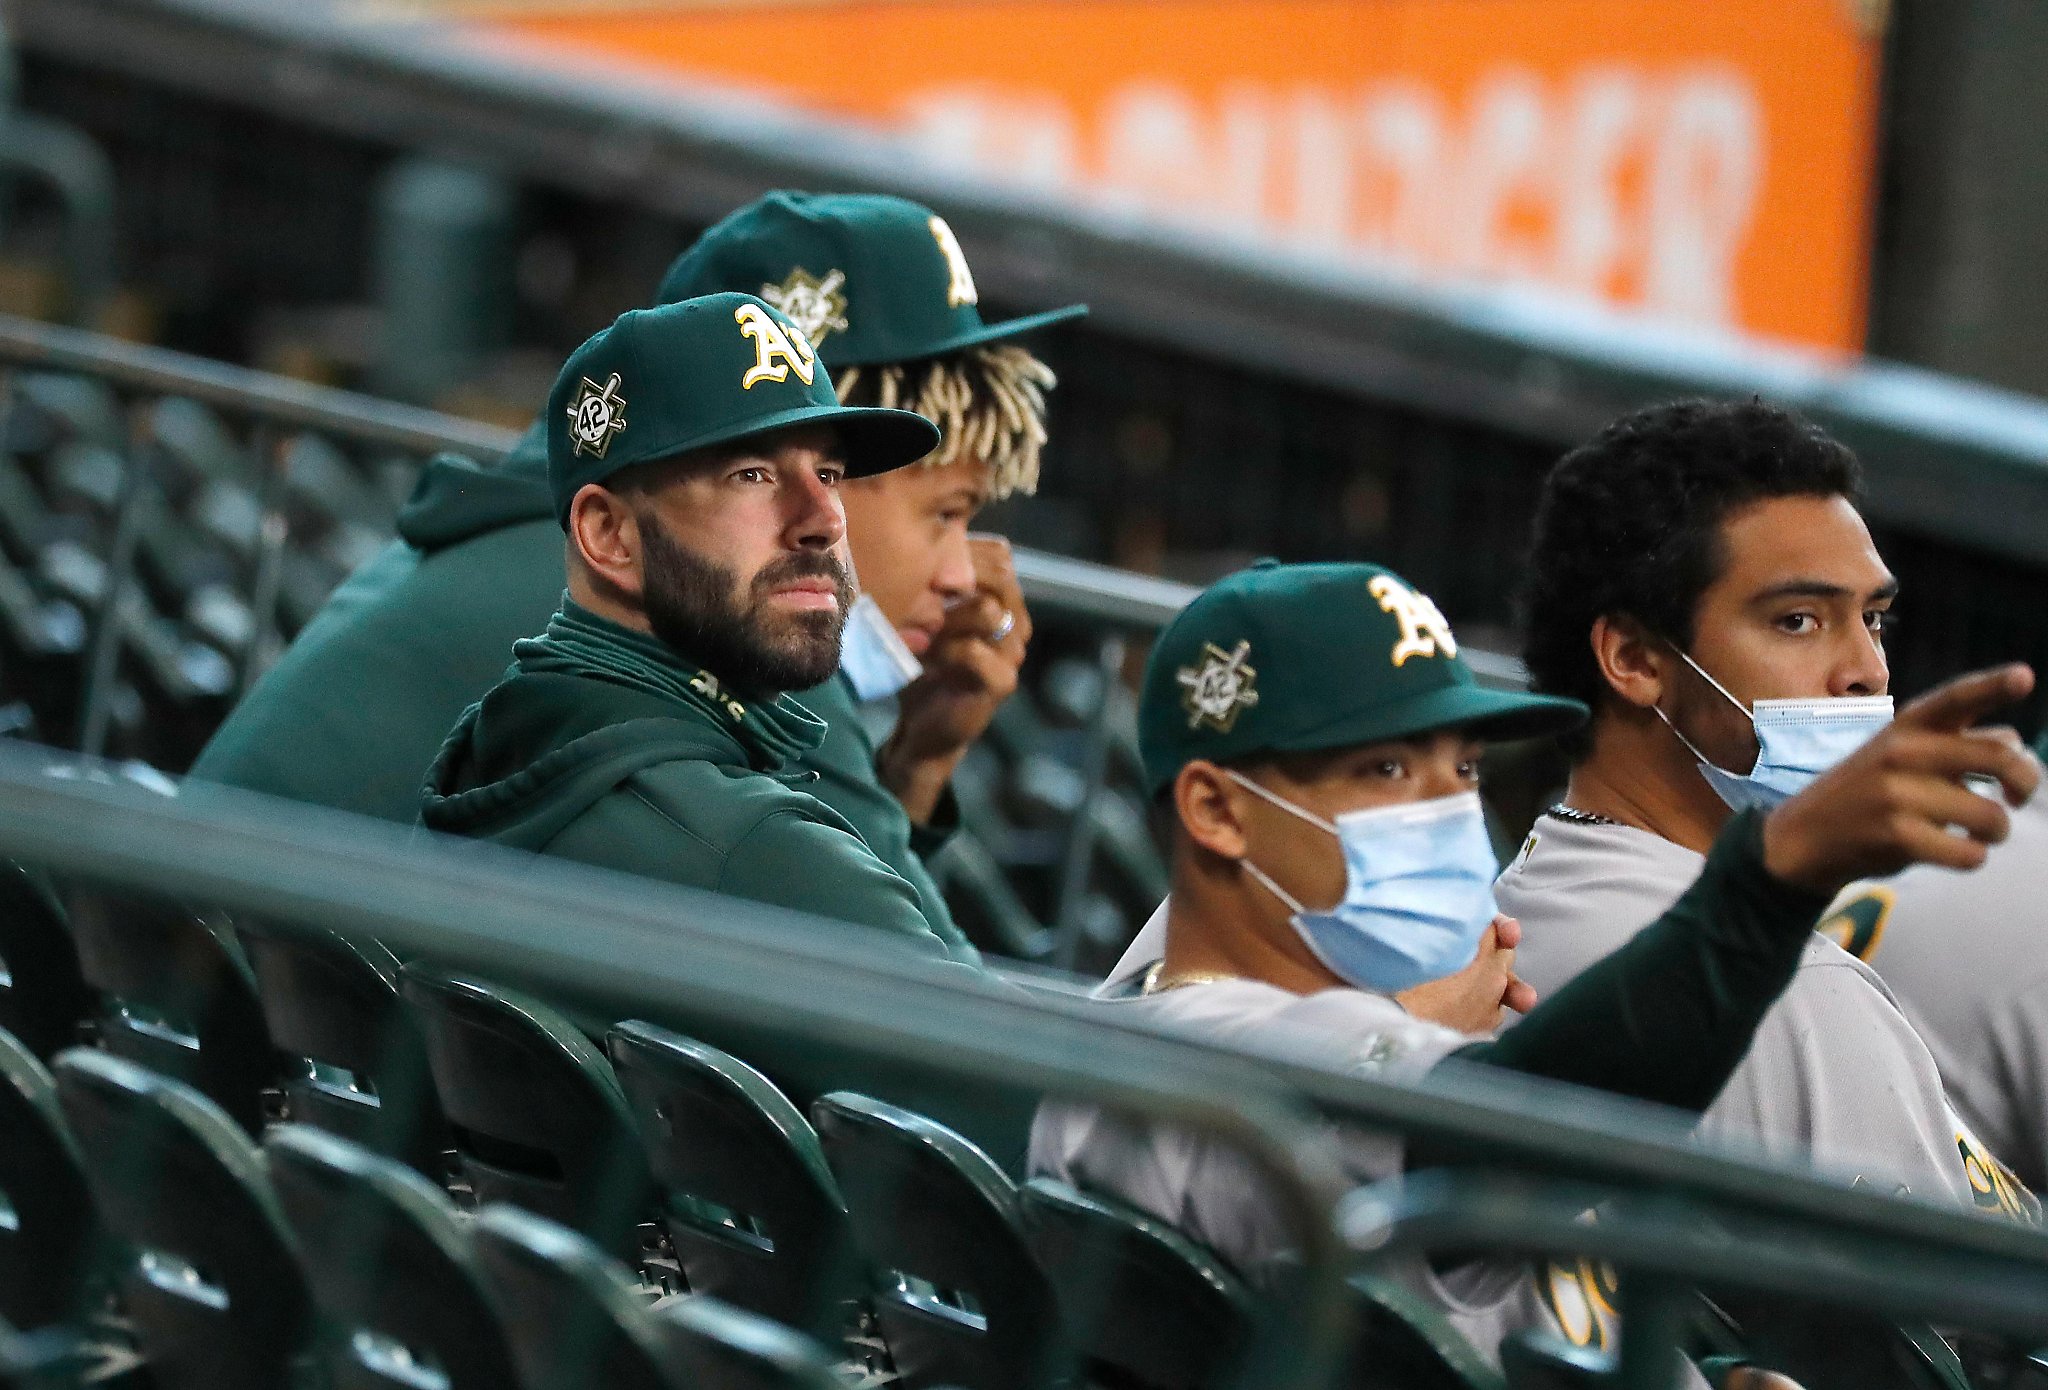 A’s face Game 3 pitching dilemma: start Mike Fiers or Sean Manaea? - San Francisco Chronicle